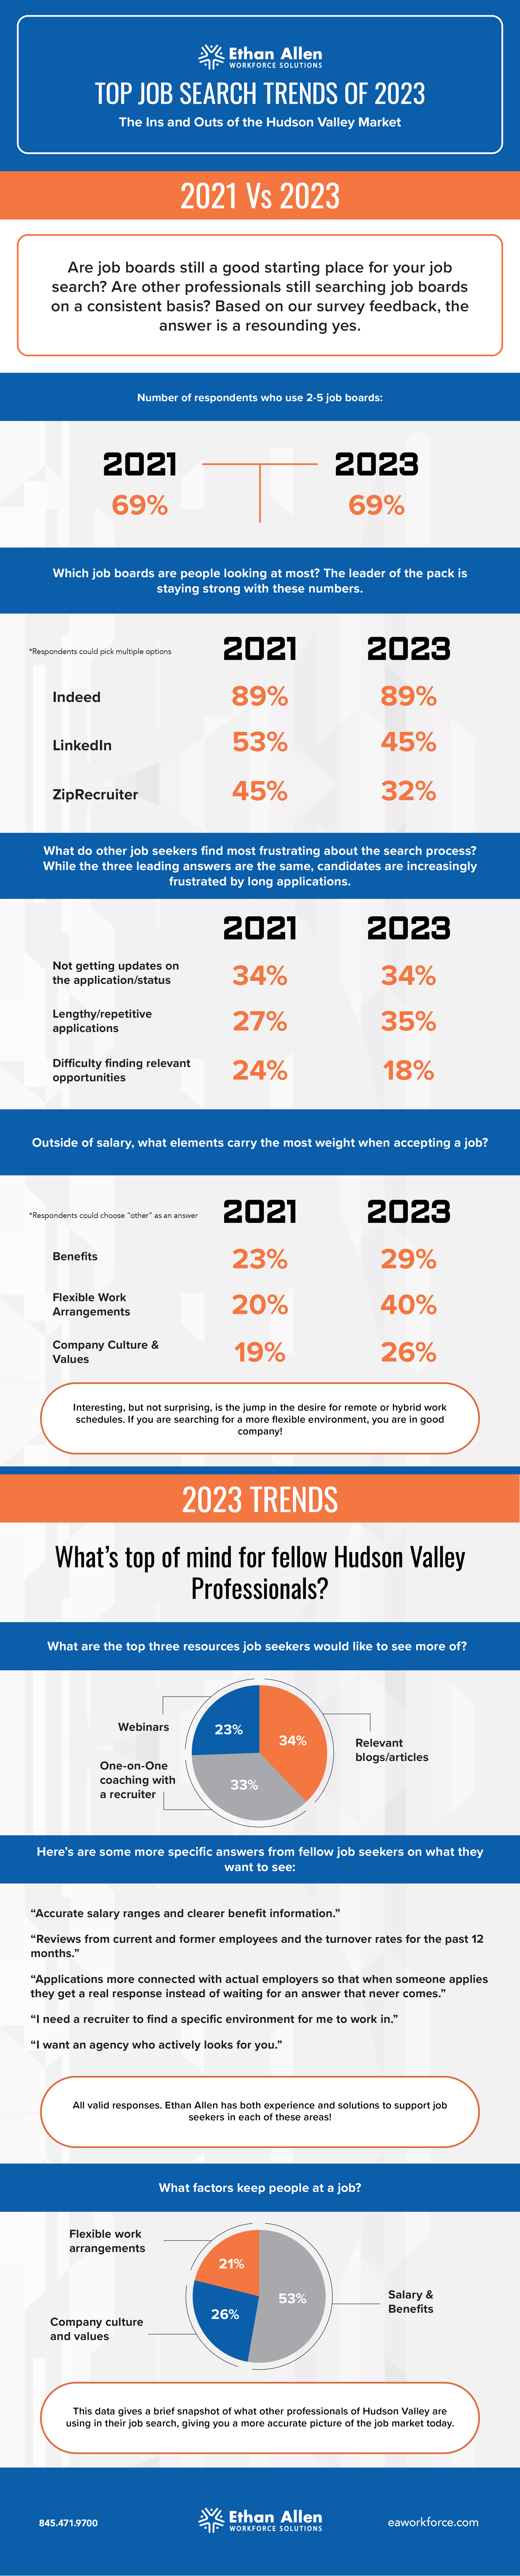 Top Job Search Trends of 2023 Final